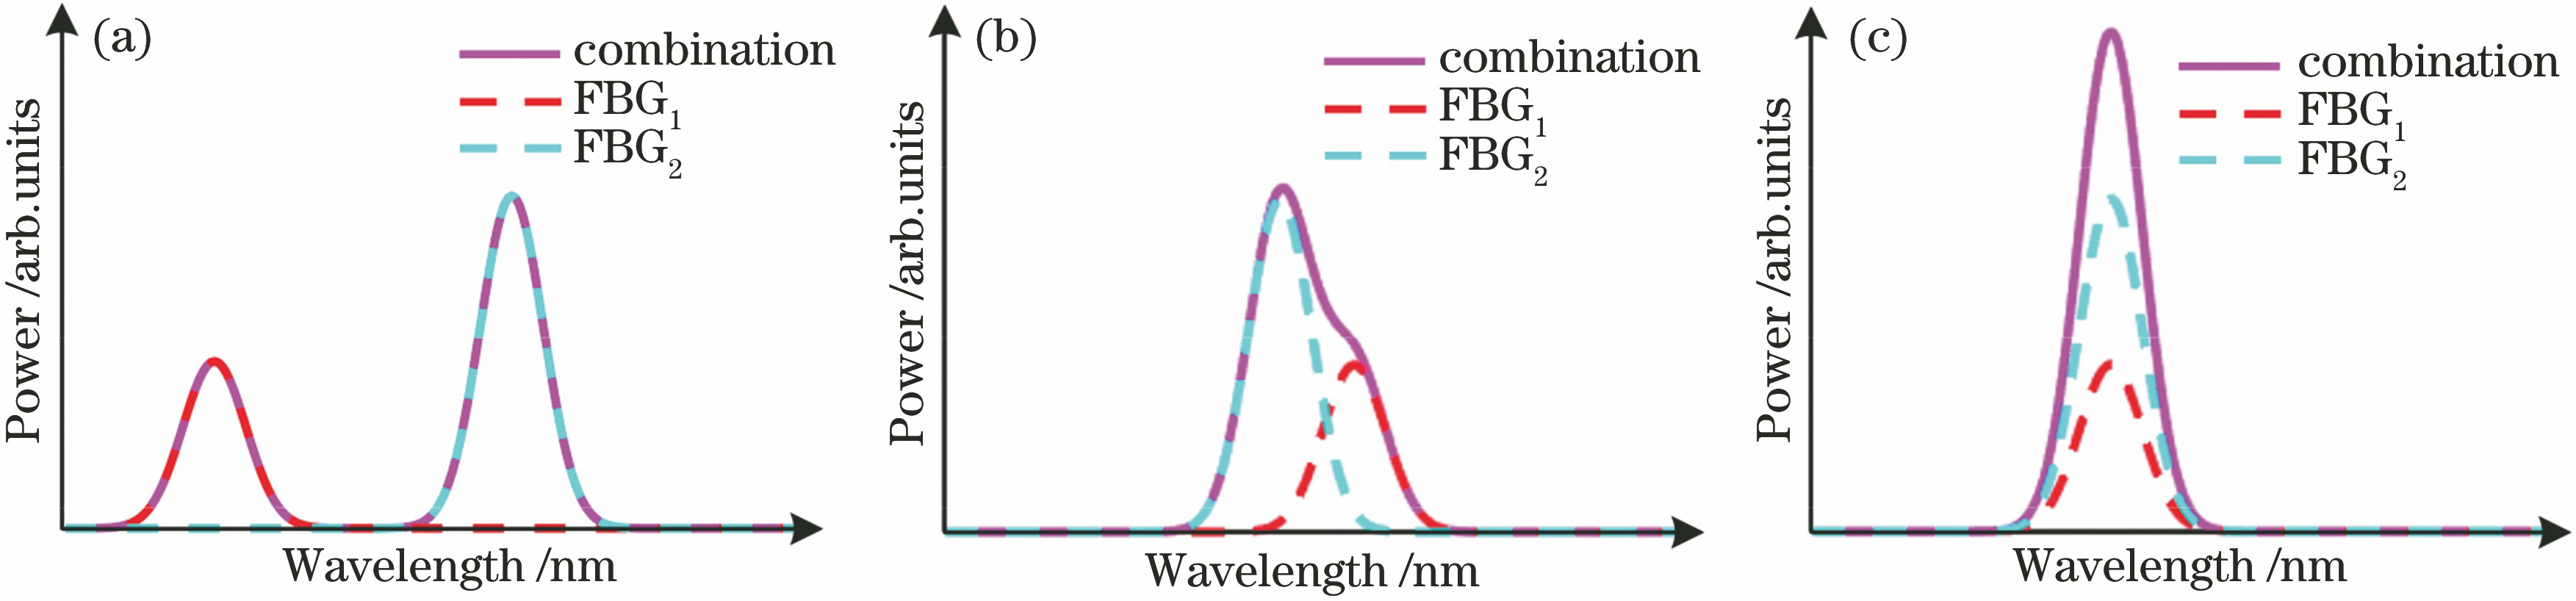 Overlapping types of FBG reflection spectra. (a) Non-overlapping; (b) partly-overlapping; (c) fully-overlapping